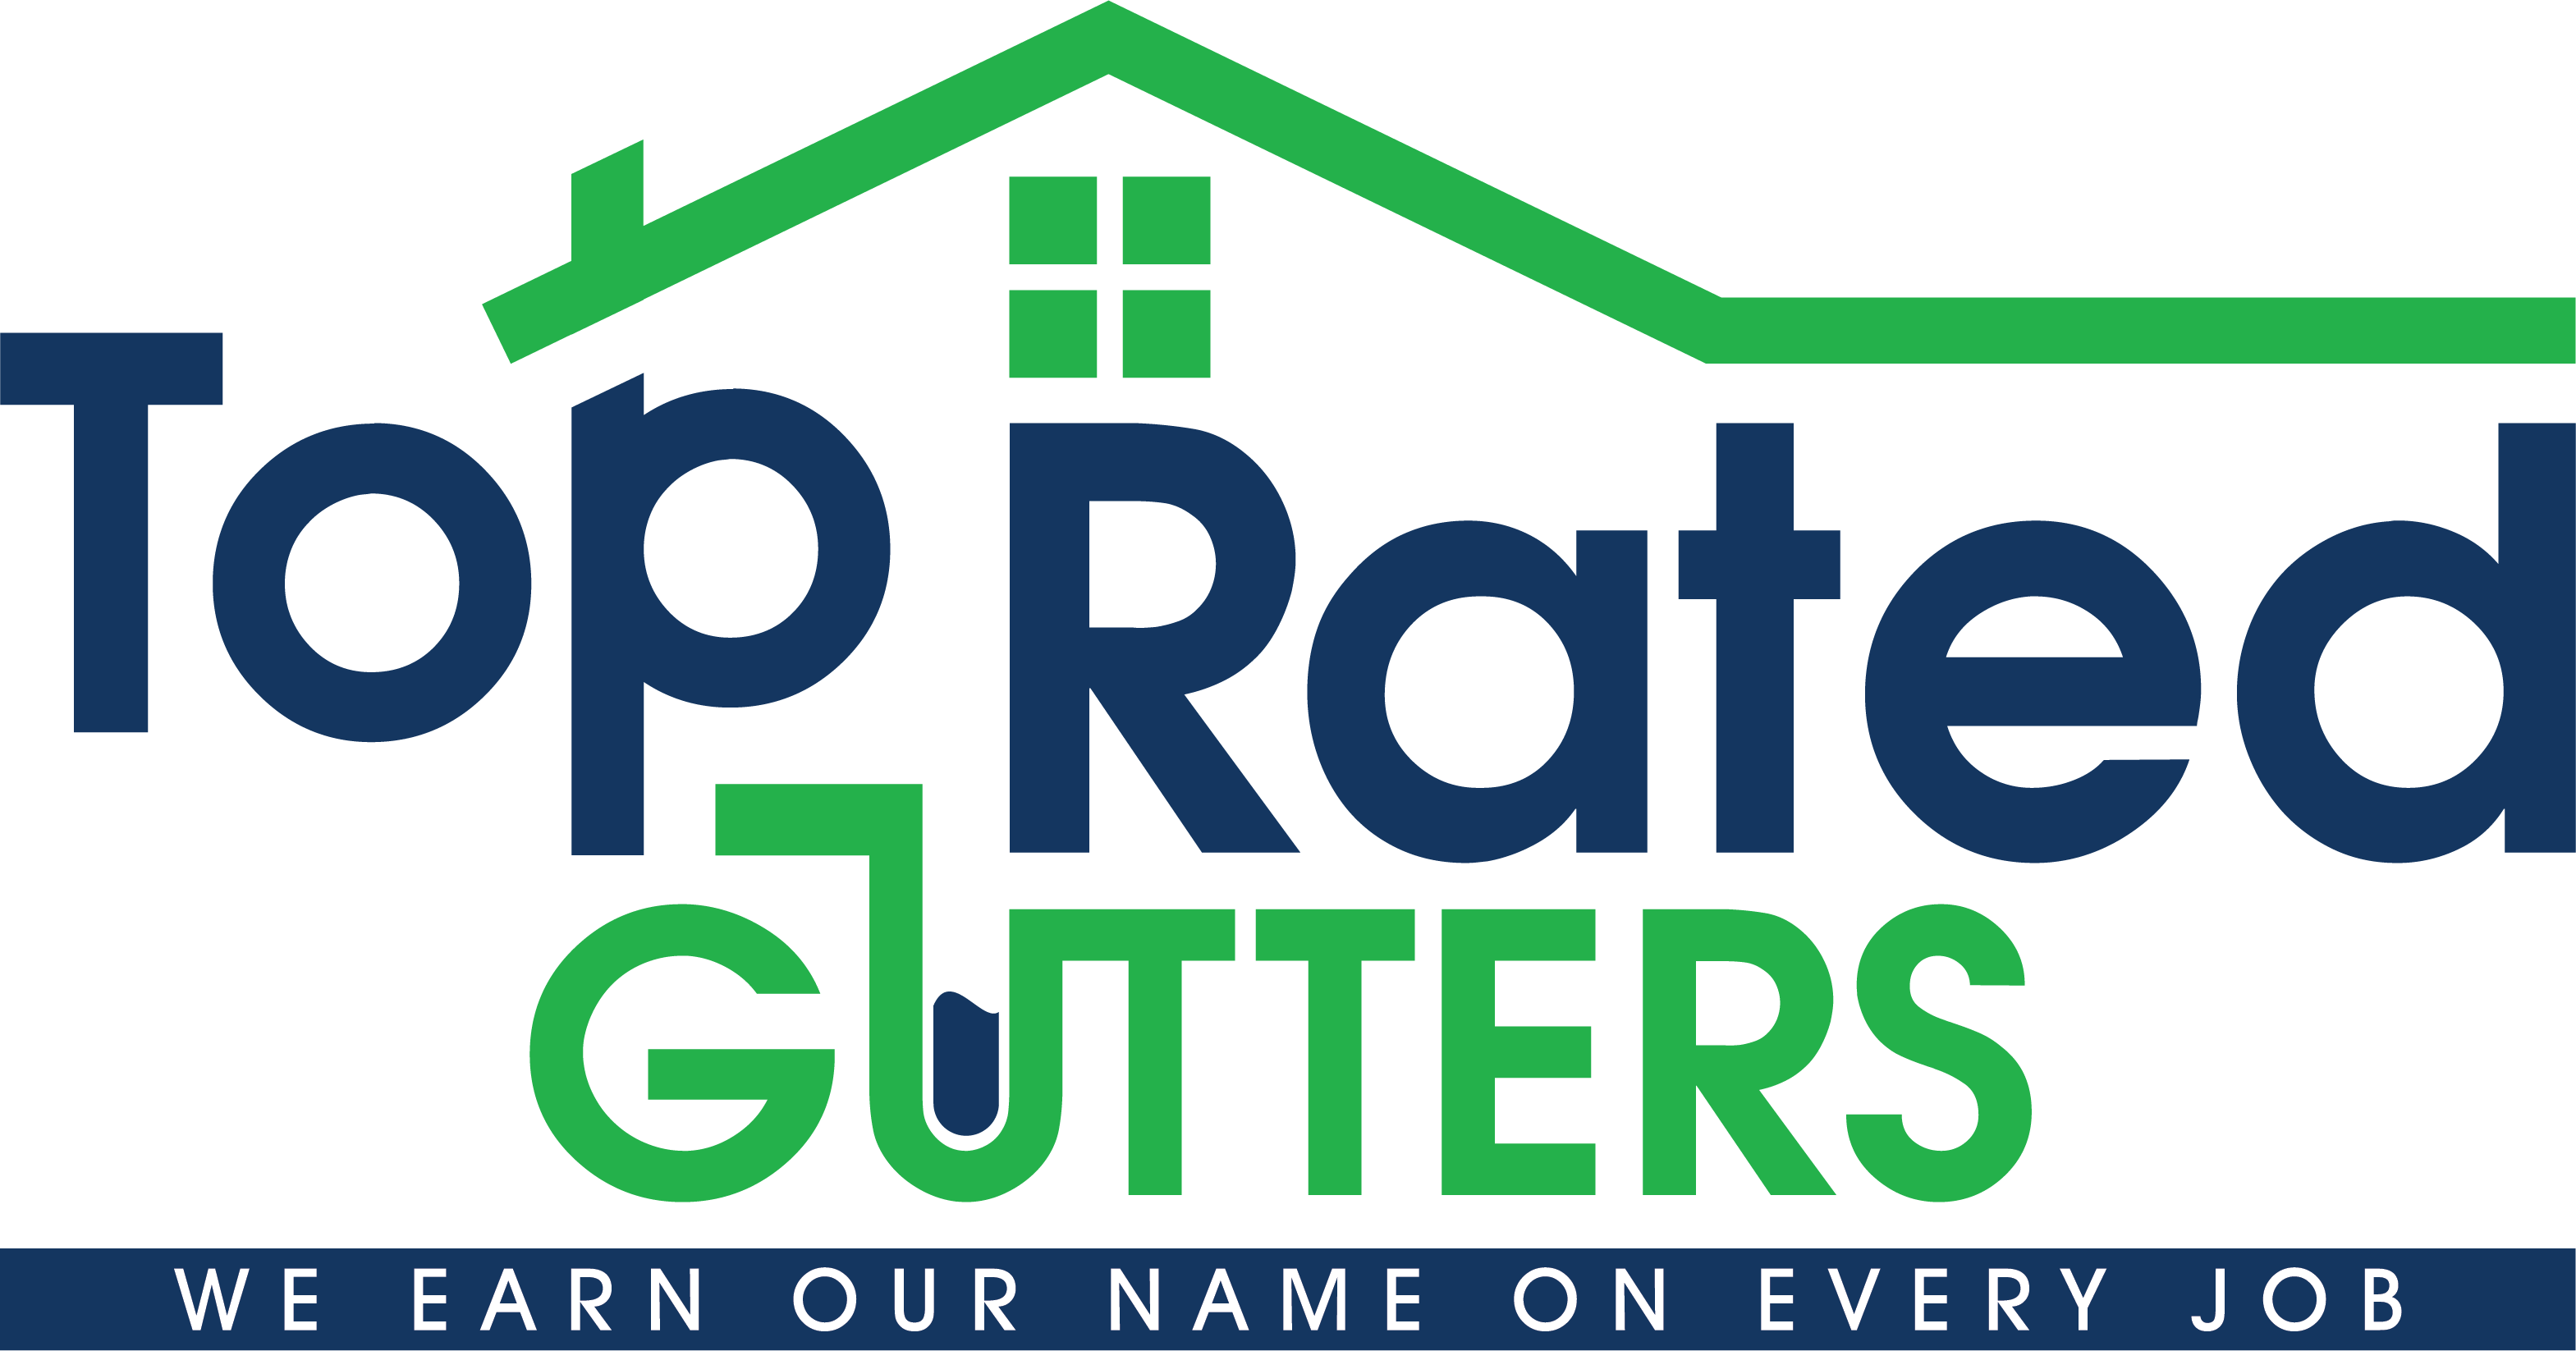 Top Rated Gutters